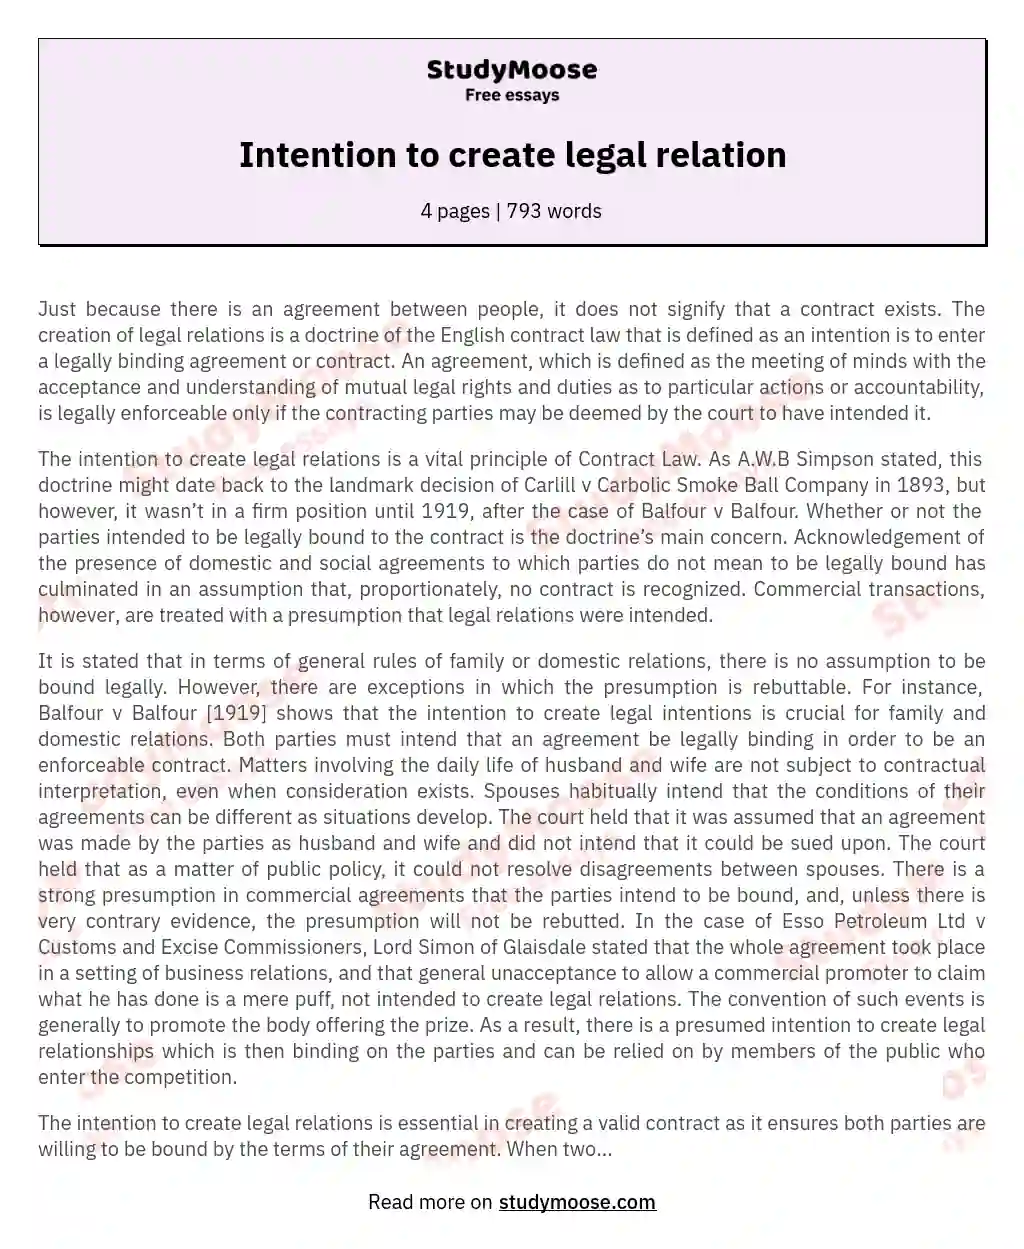 Intention to create legal relation essay